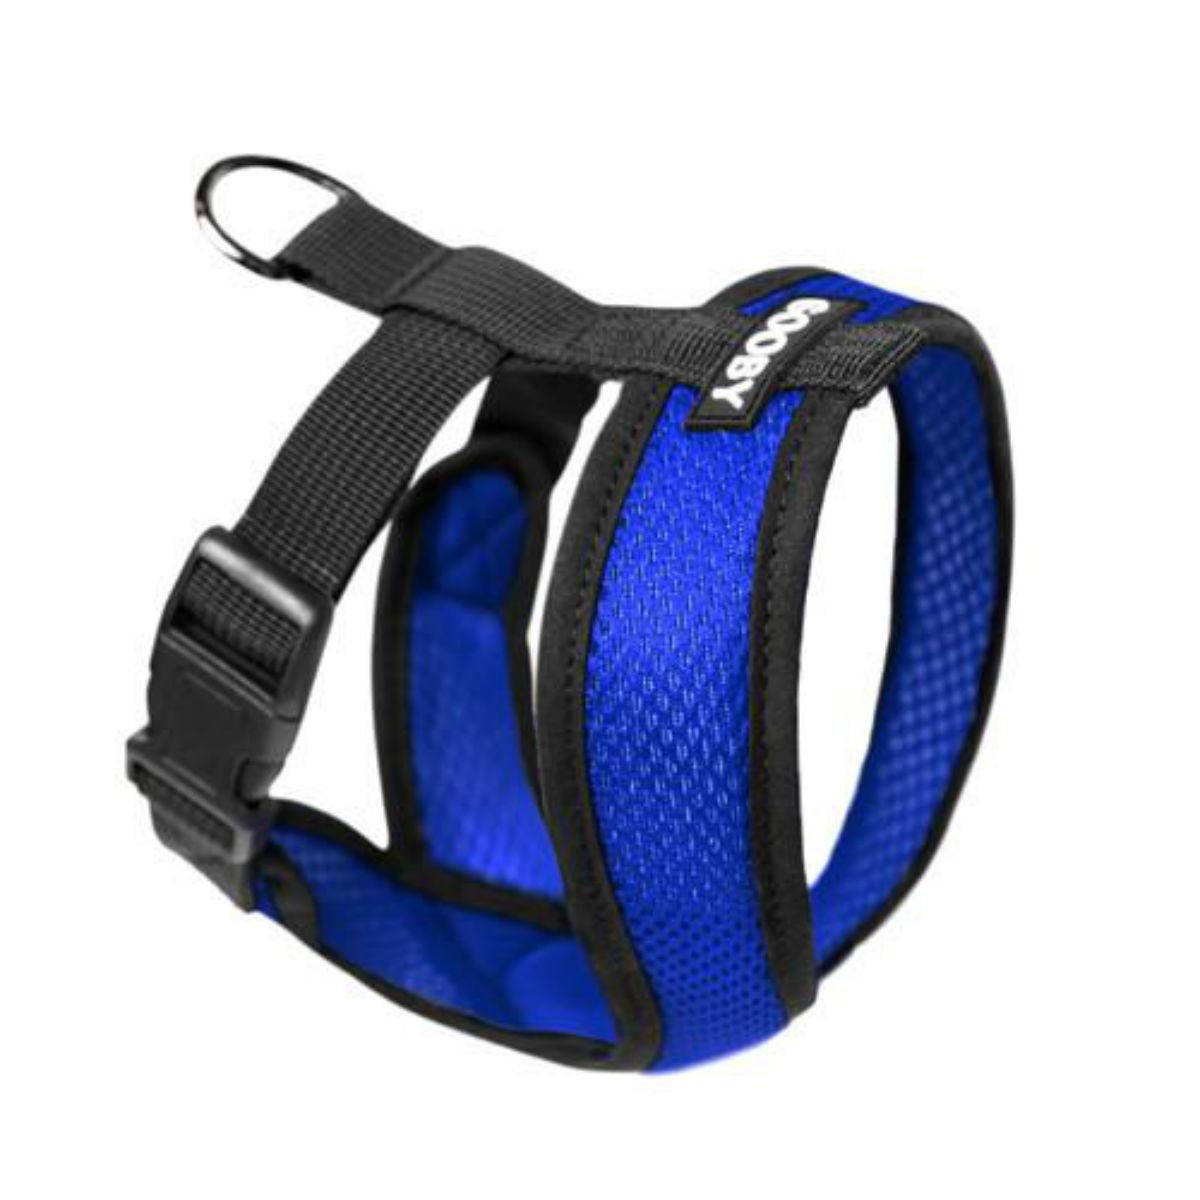 Comfort X Dog Harness by Gooby - Blue